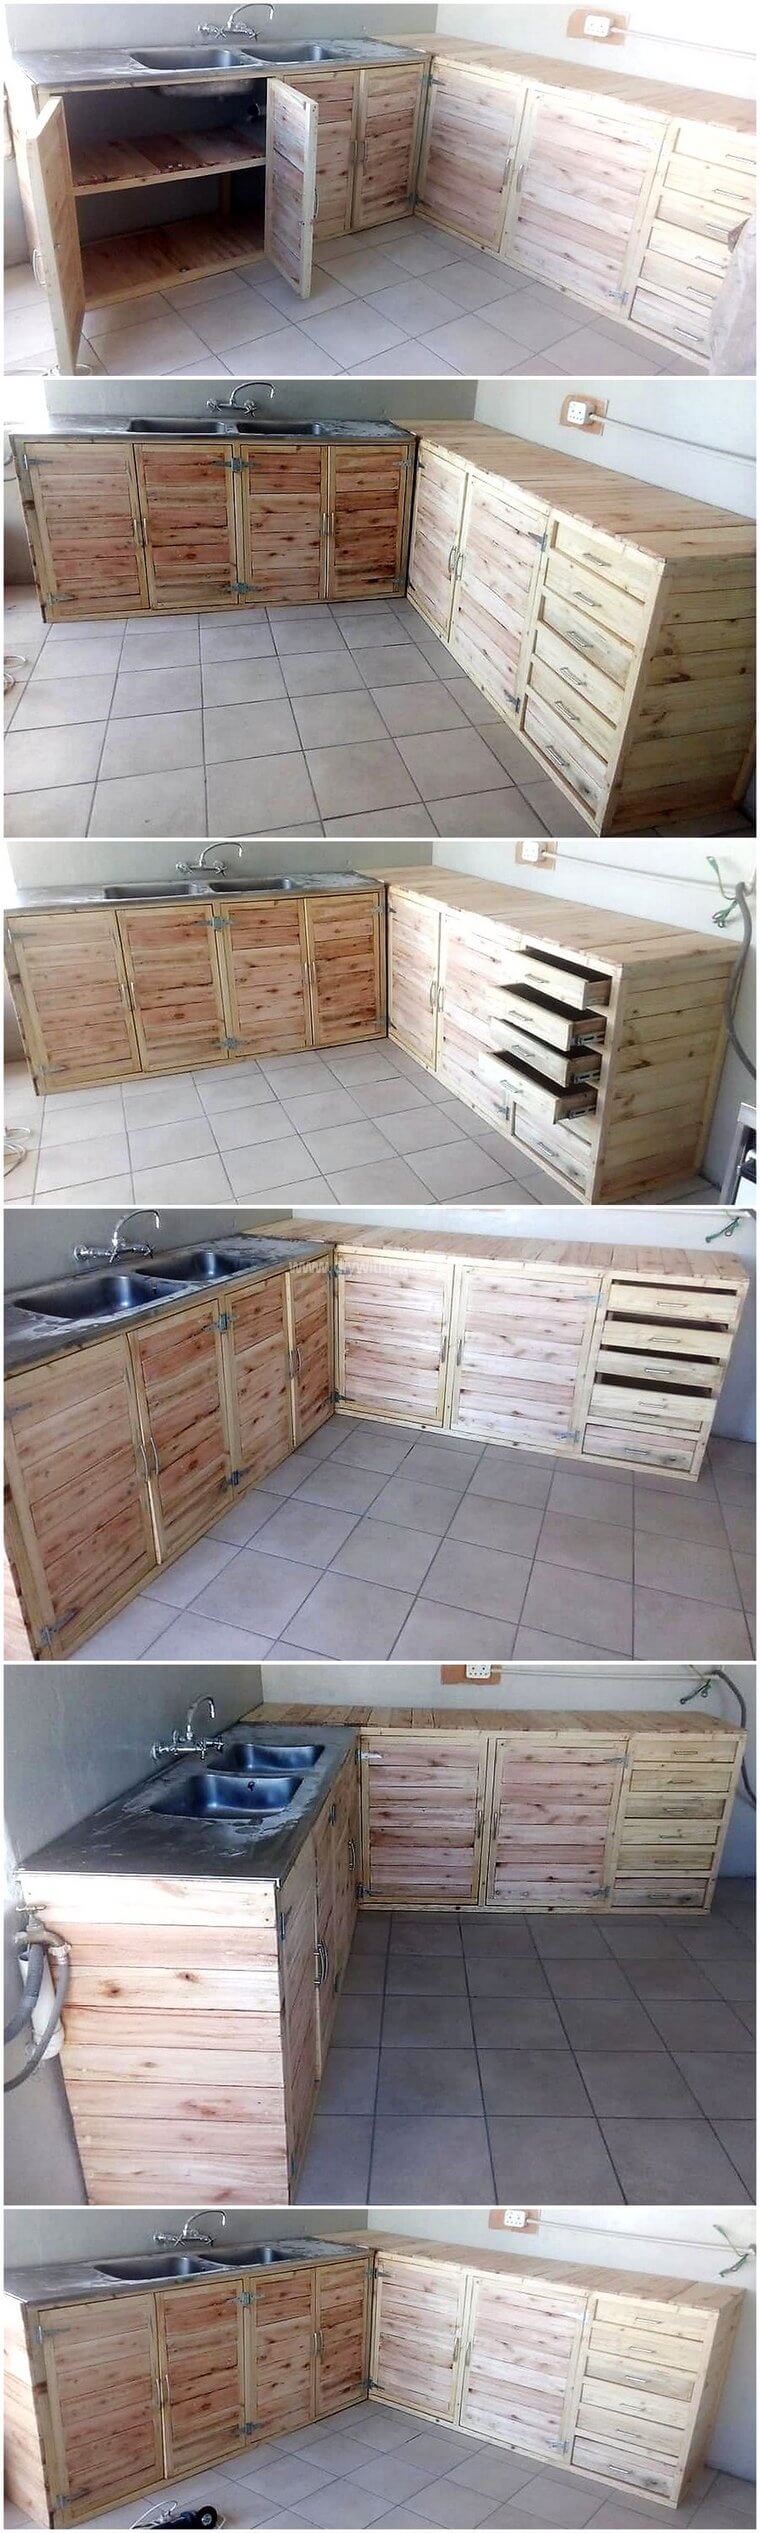 recycled pallet kitchen